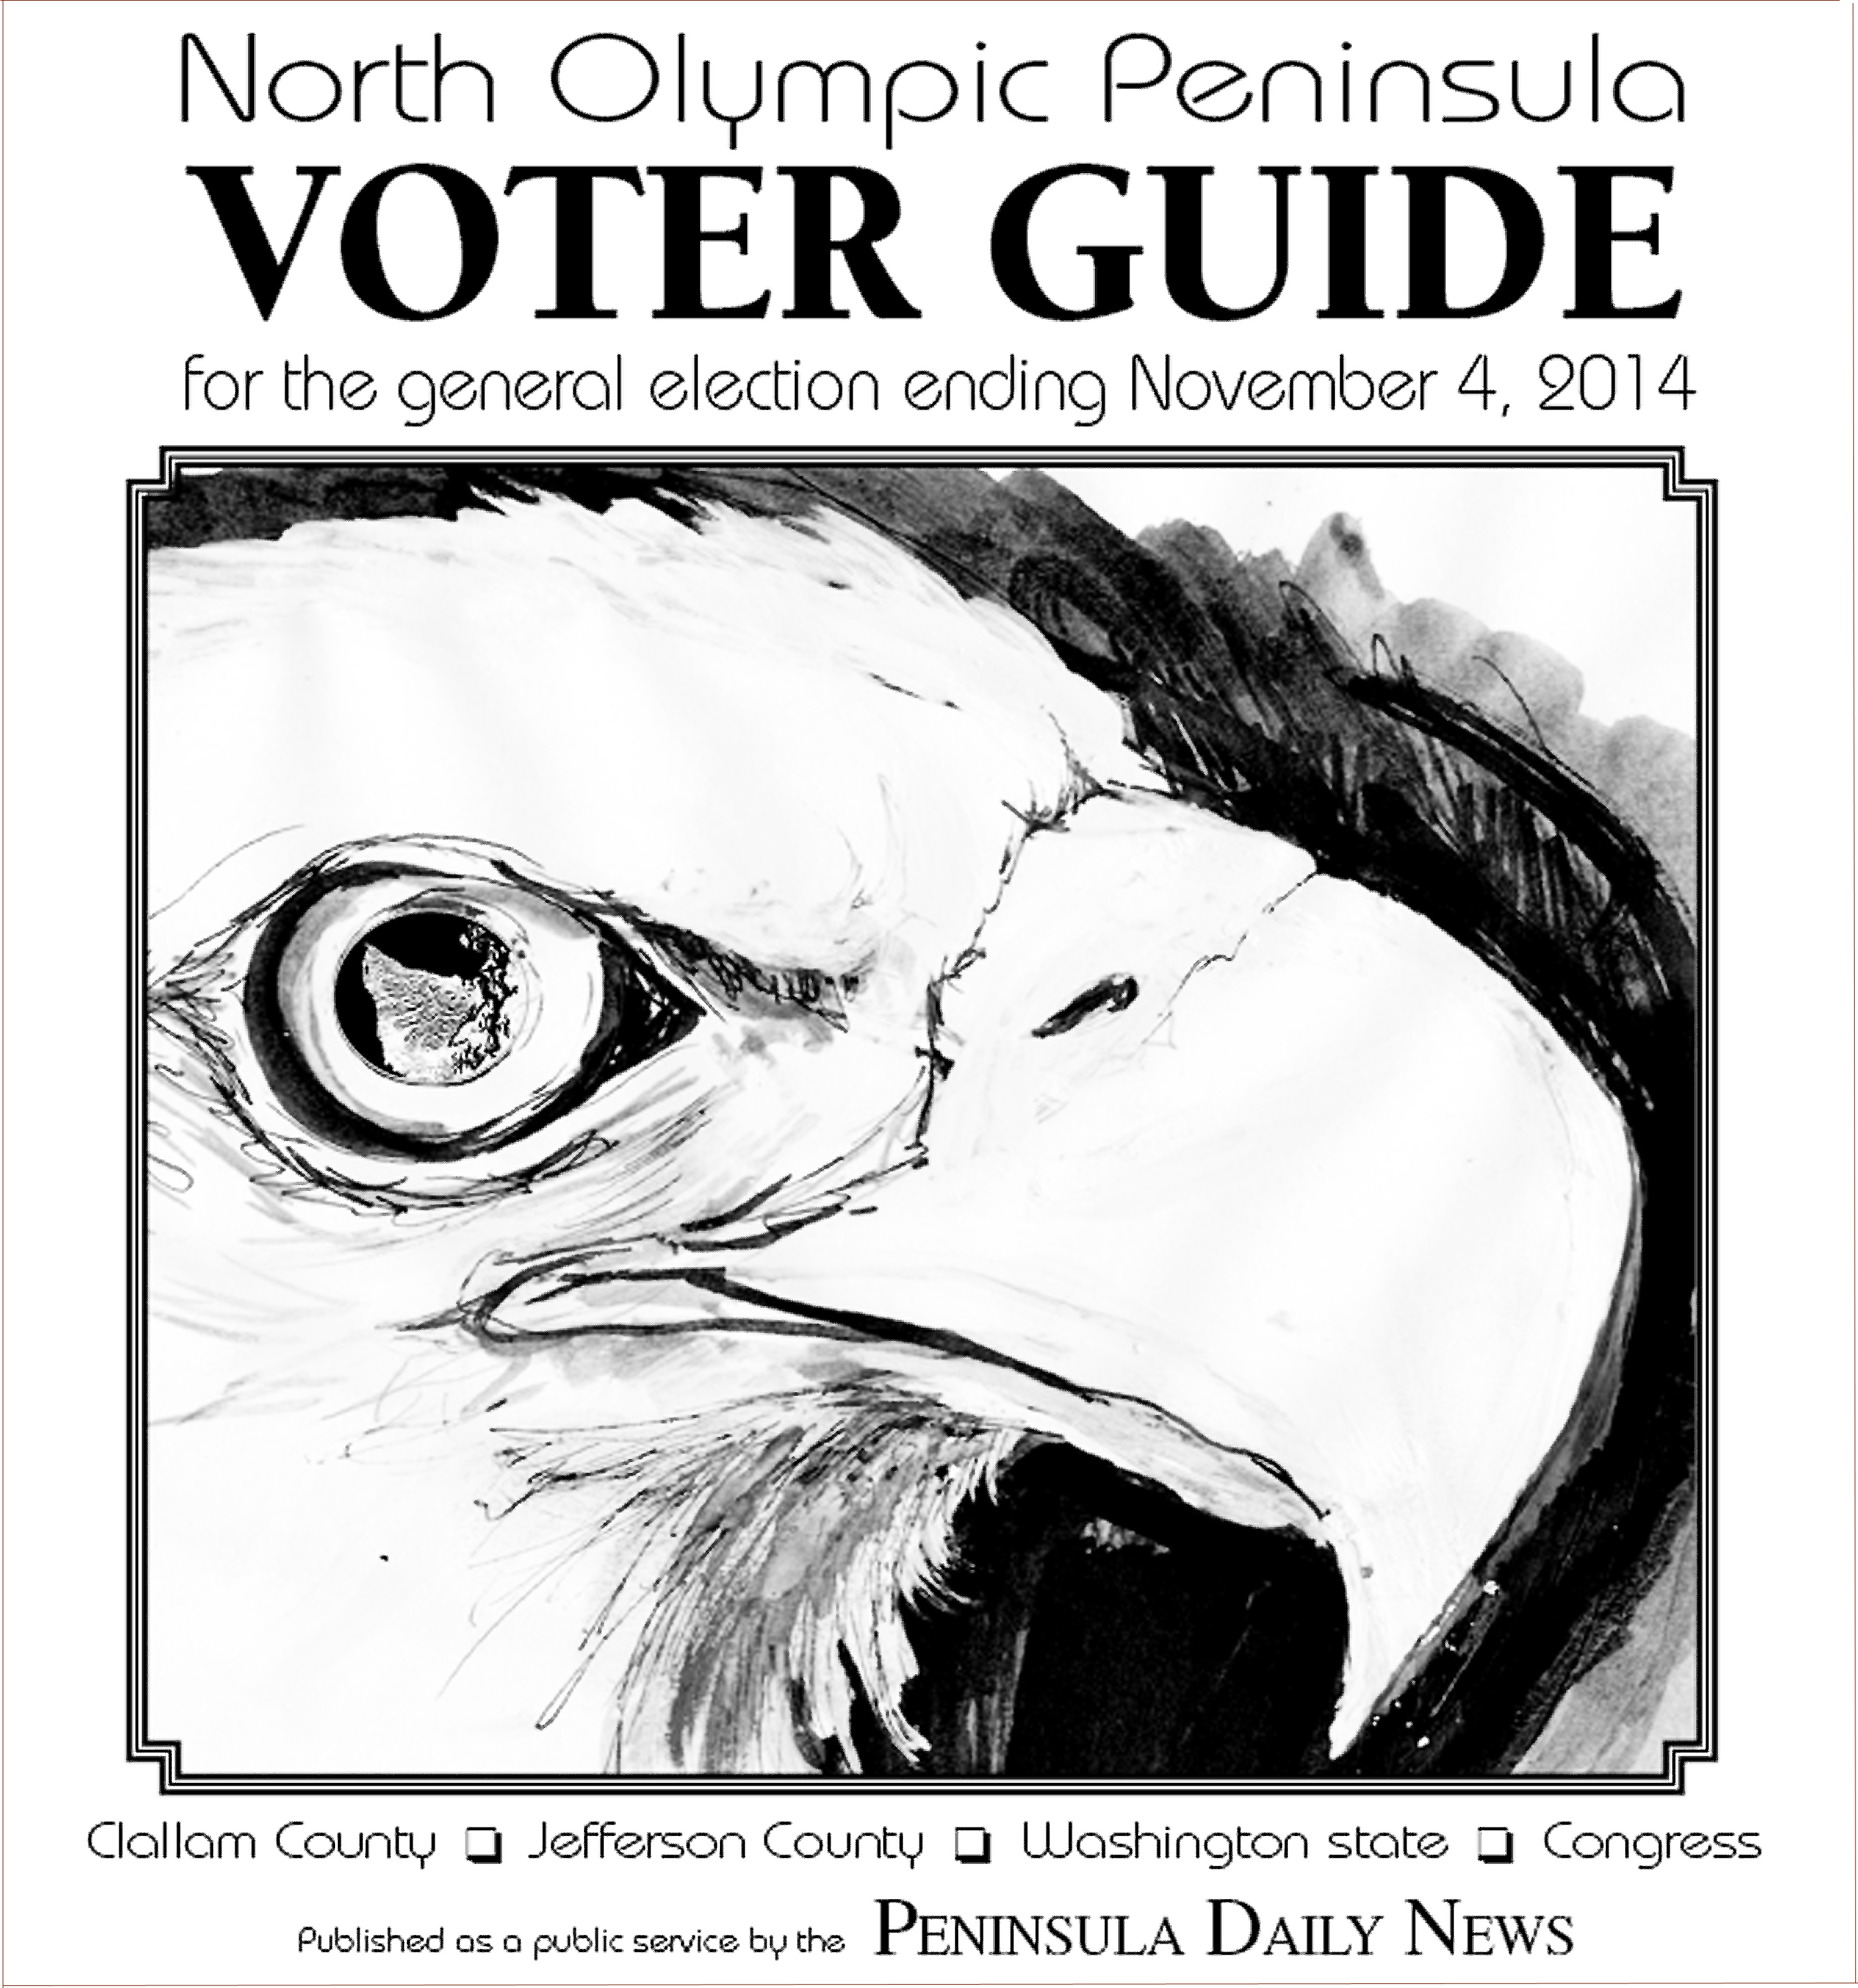 TODAY'S THE FINAL DAY: North Olympic Peninsula Voter Guide offers info on state issues, races in Jefferson, Clallam counties